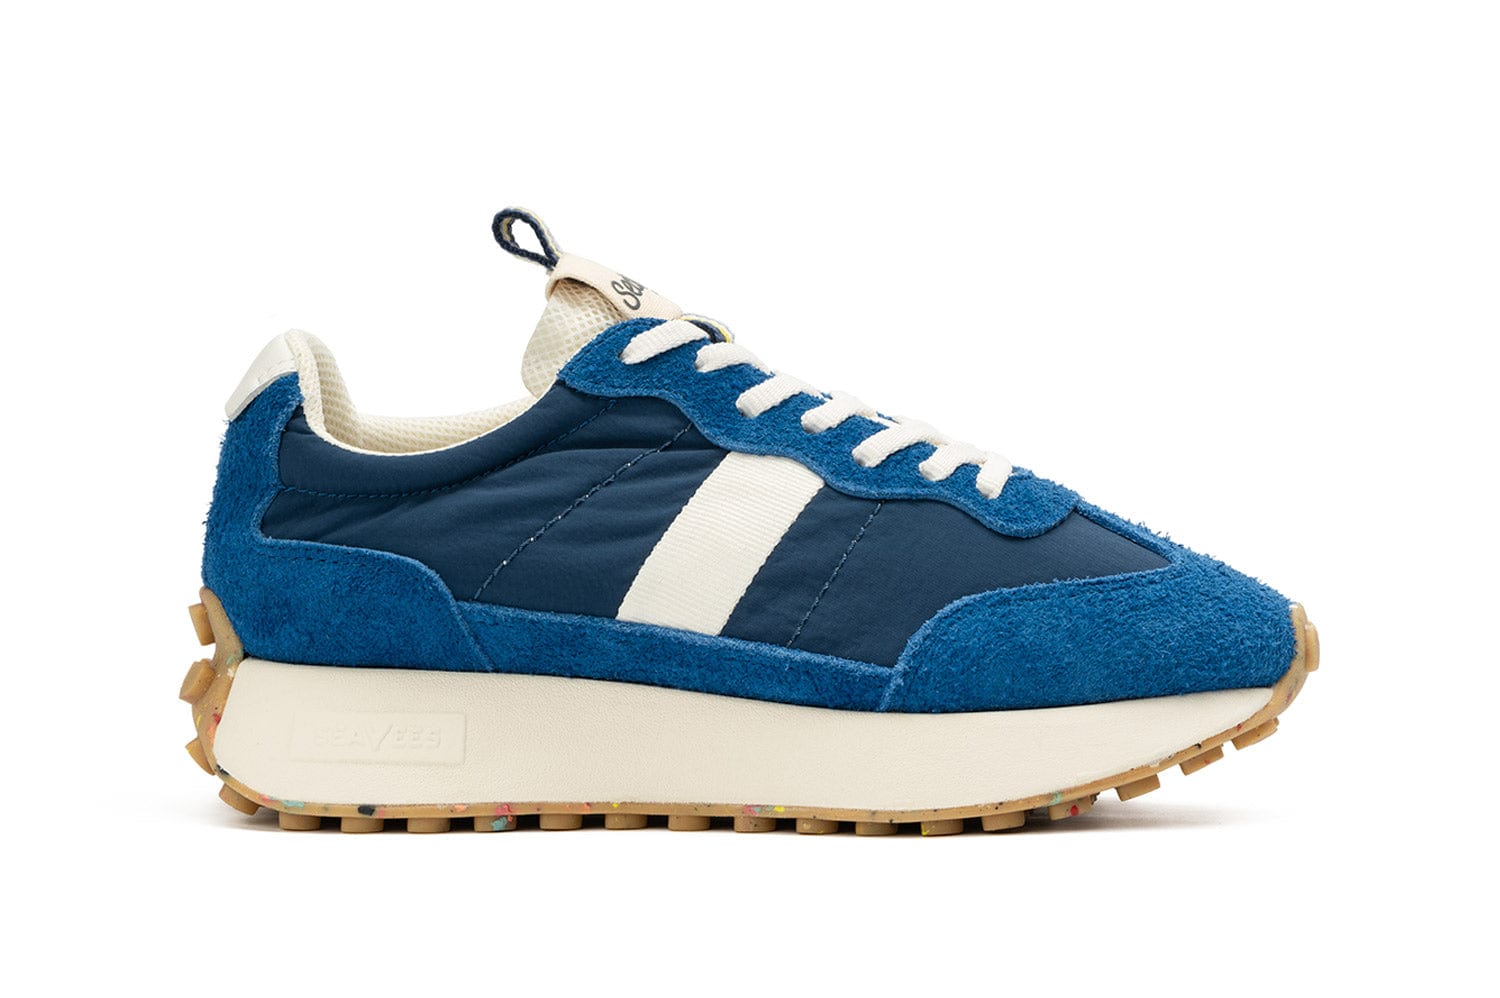 Side view of the Acorn Trainer in the color Varsity Blue, showcasing the thick sole and side detail.